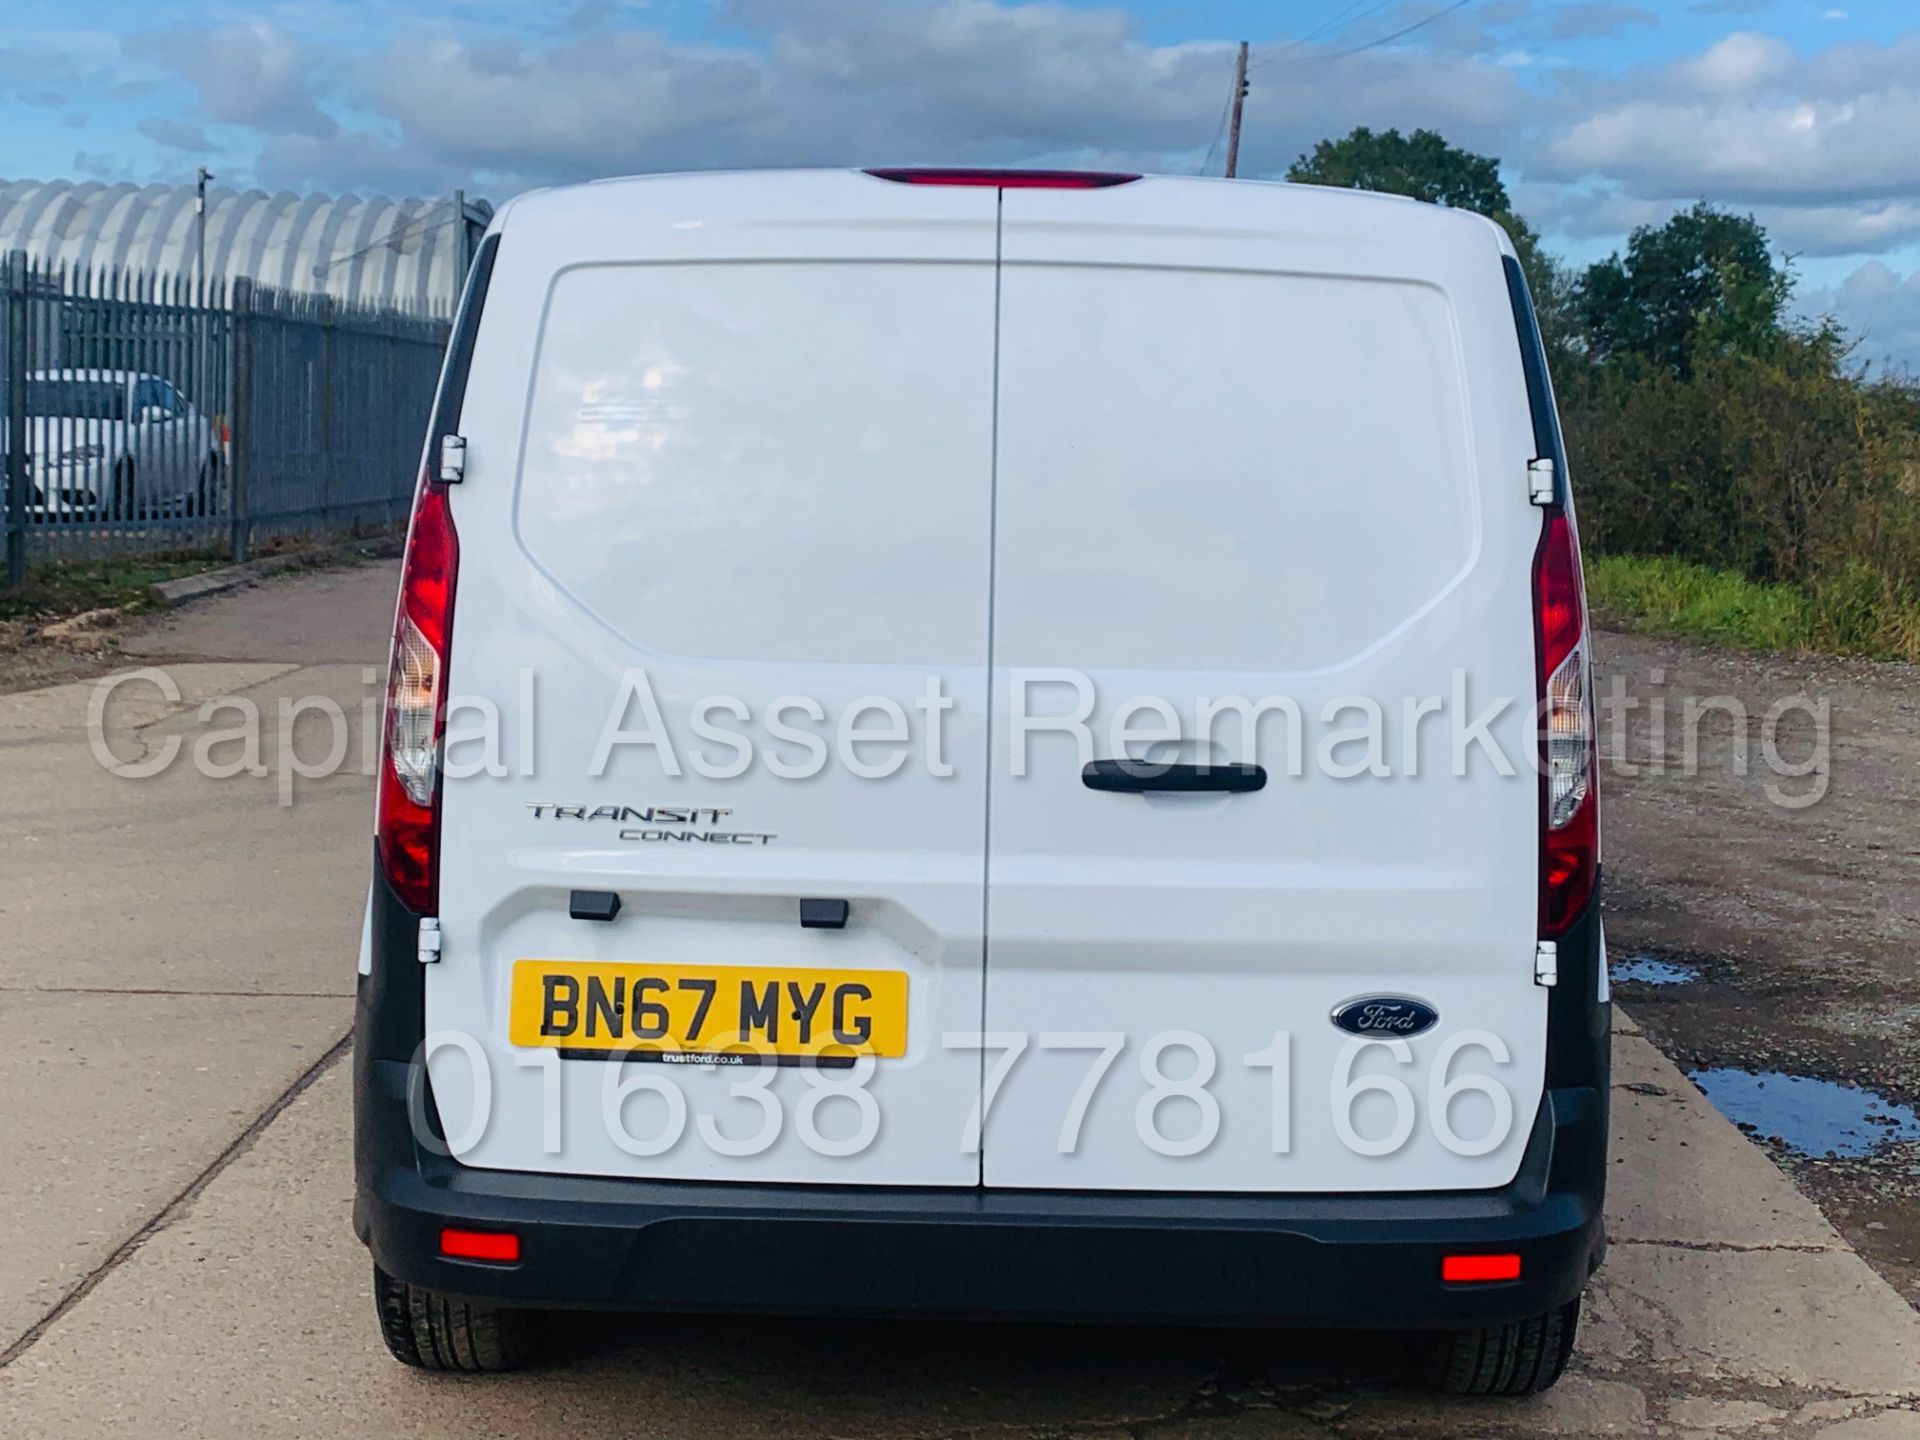 (On Sale) FORD TRANSIT CONNECT *LWB - 5 SEATER CREW VAN* (67 REG - EURO 6) 1.5 TDCI *A/C* (1 OWNER) - Image 10 of 40